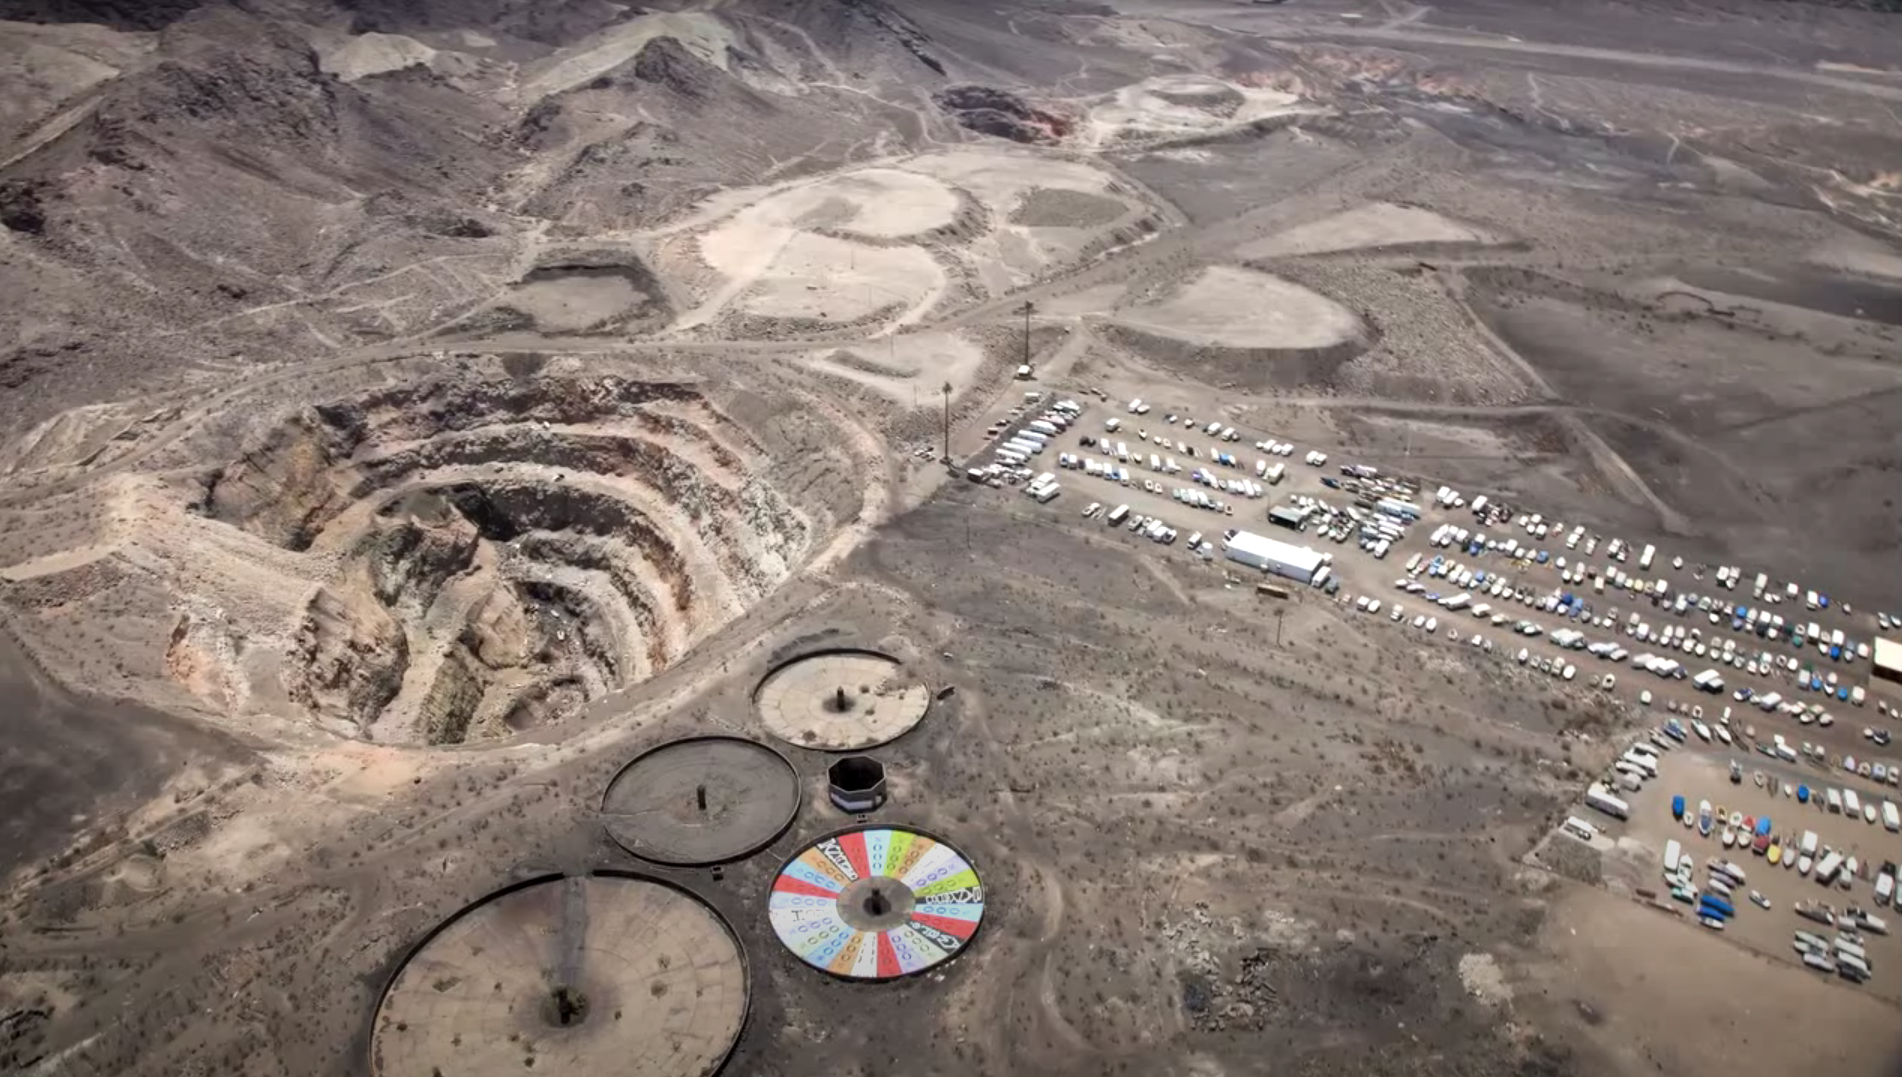 The Hydro pit, Hulin pit, three tailings ponds, overburden, flotation tank foundations, and a portion of the ore yard are visible in this aerial photograph of the Three Kids Mine site. as well as the nearby Lake Mead Boat Storage and Laker Plaza businesses.